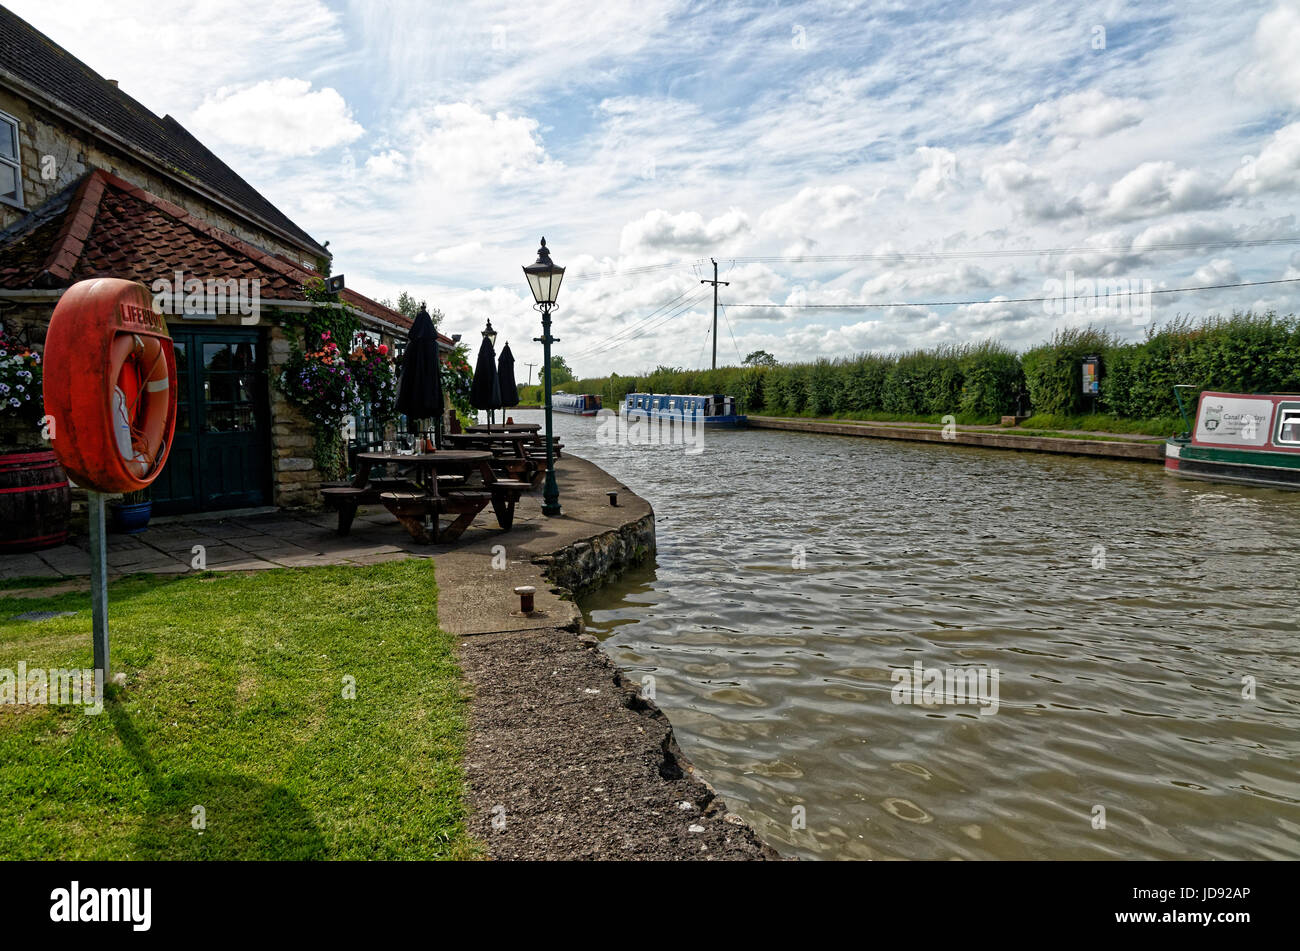 Public house on the banks of the Kennet and Avon canal Stock Photo